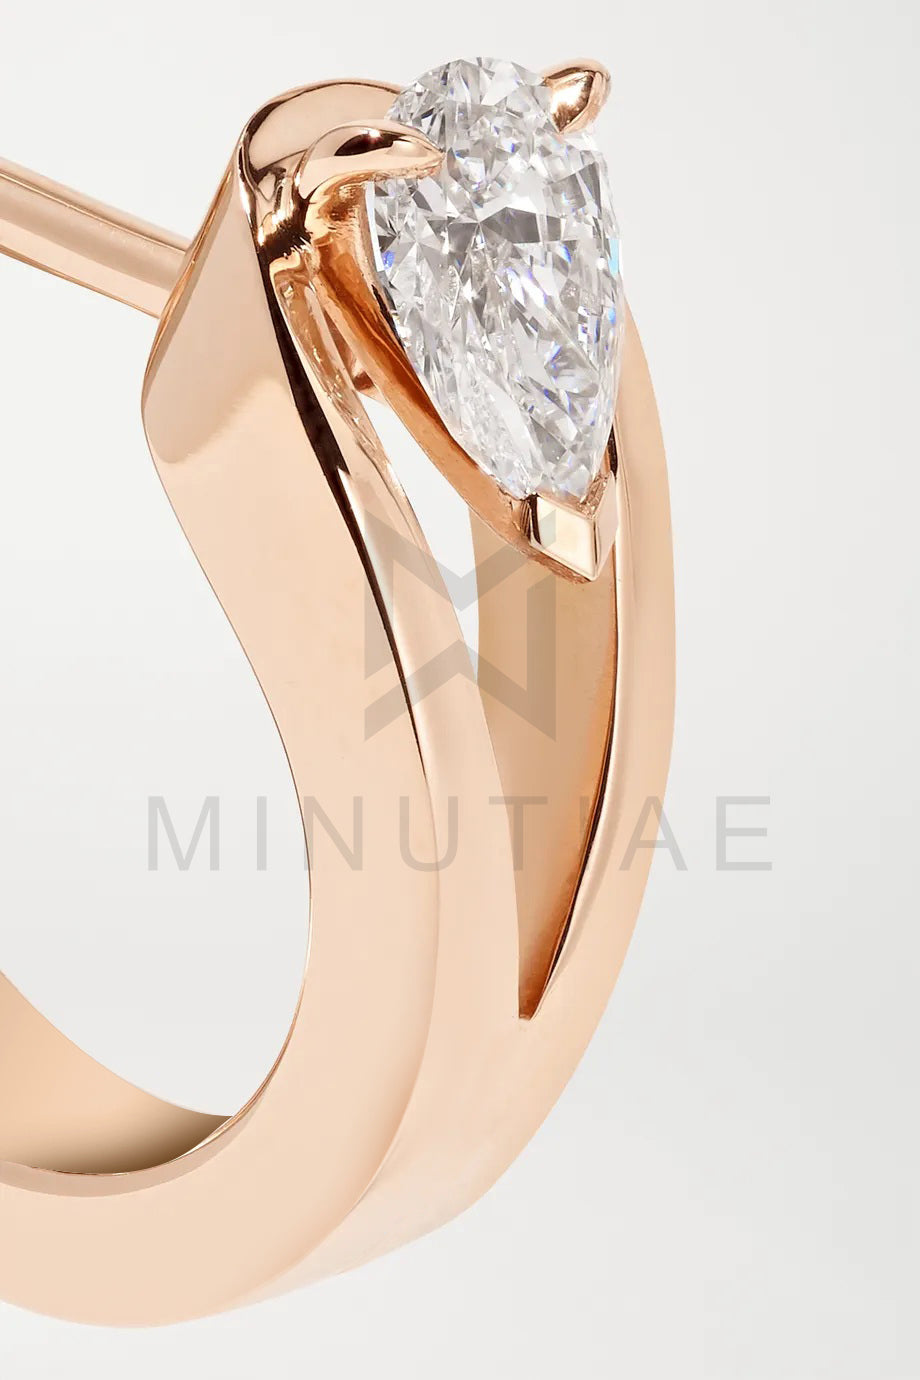 Gold Plated Pear Crystal Solitaire Huggie